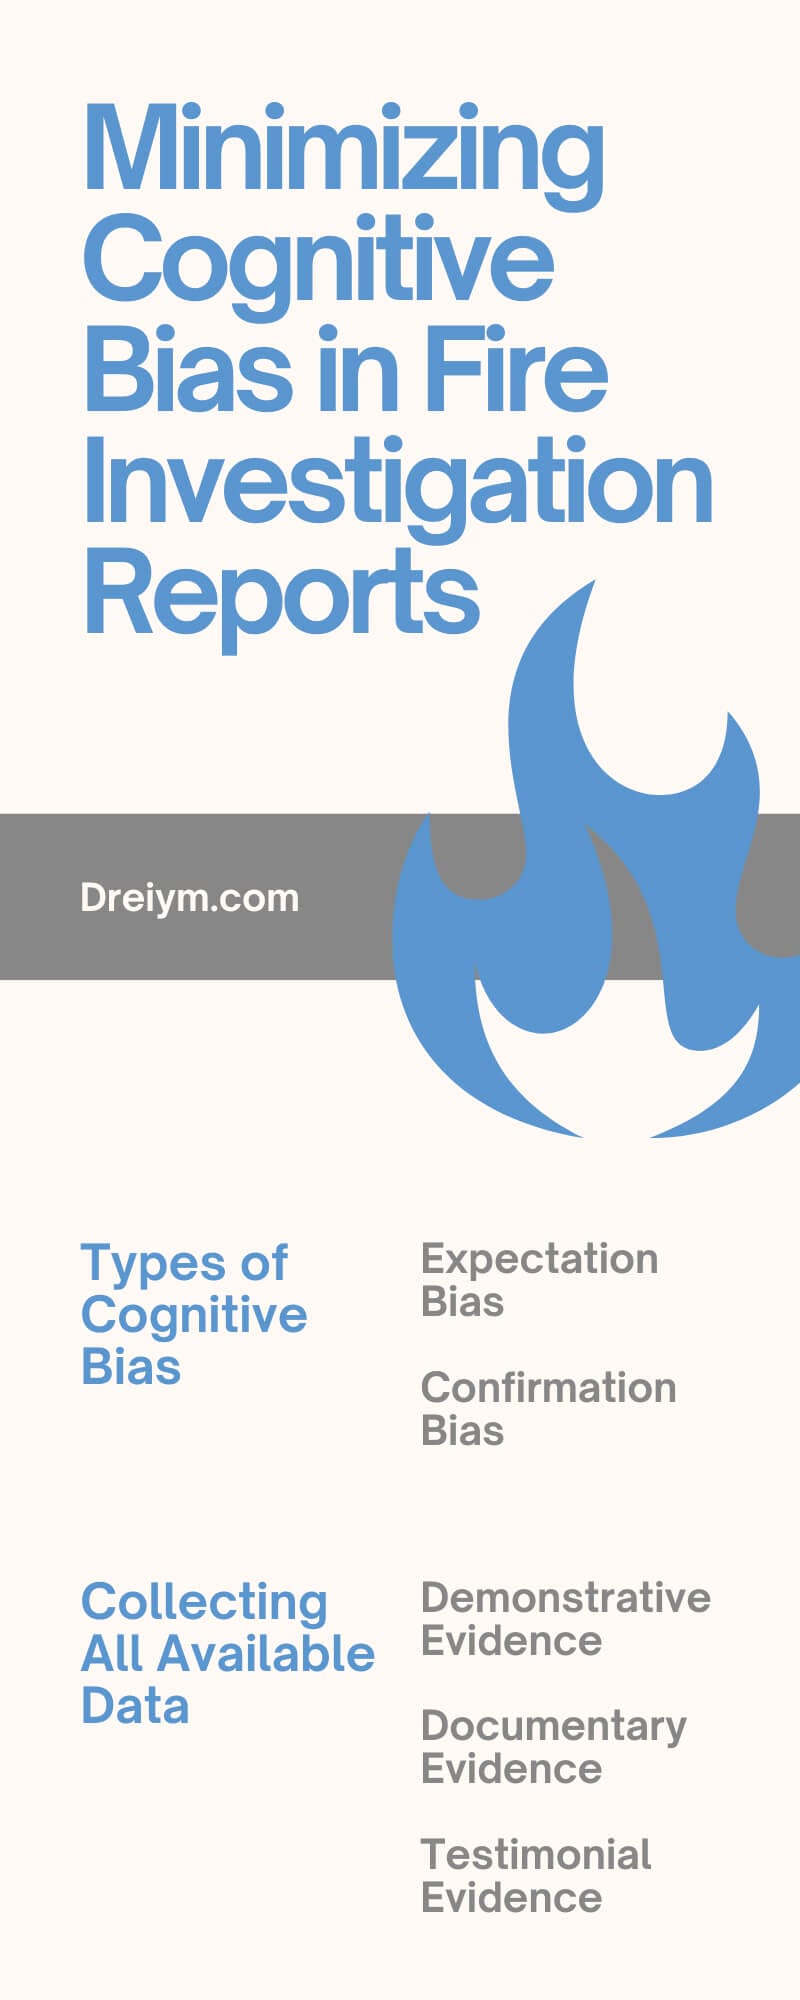 Minimizing Cognitive Bias in Fire Investigation Reports